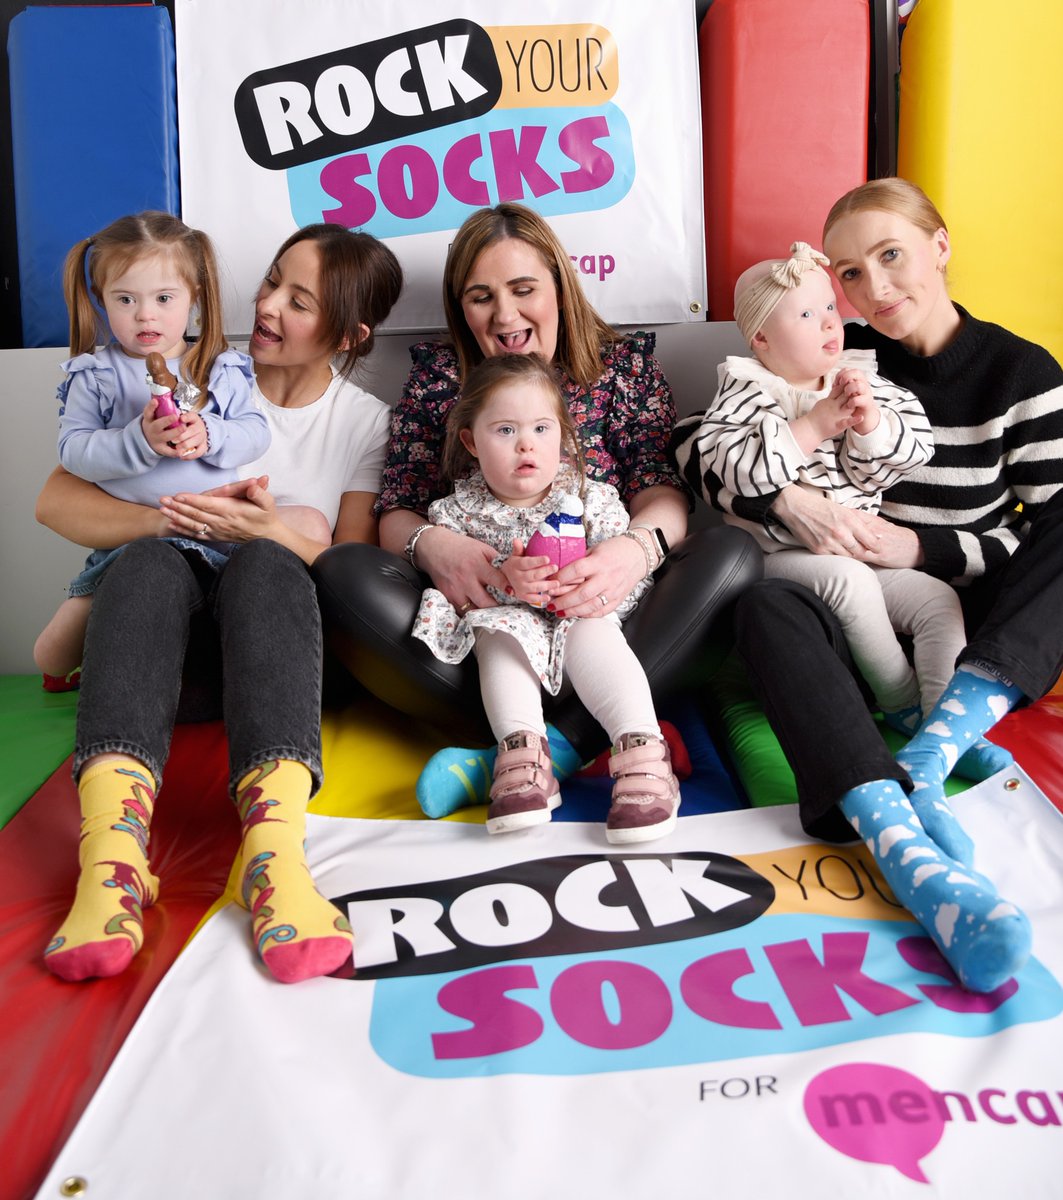 It's World Down Syndrome Day! Are you rocking your socks for Mencap? 🧦 Meet Matilda, Camille and Anna Rose, three friends from @Mencap_NI Children’s Centre. 📖 Read their stories here: mencap.org.uk/blog/worlds-co…. #WDSD2024 [1/3]